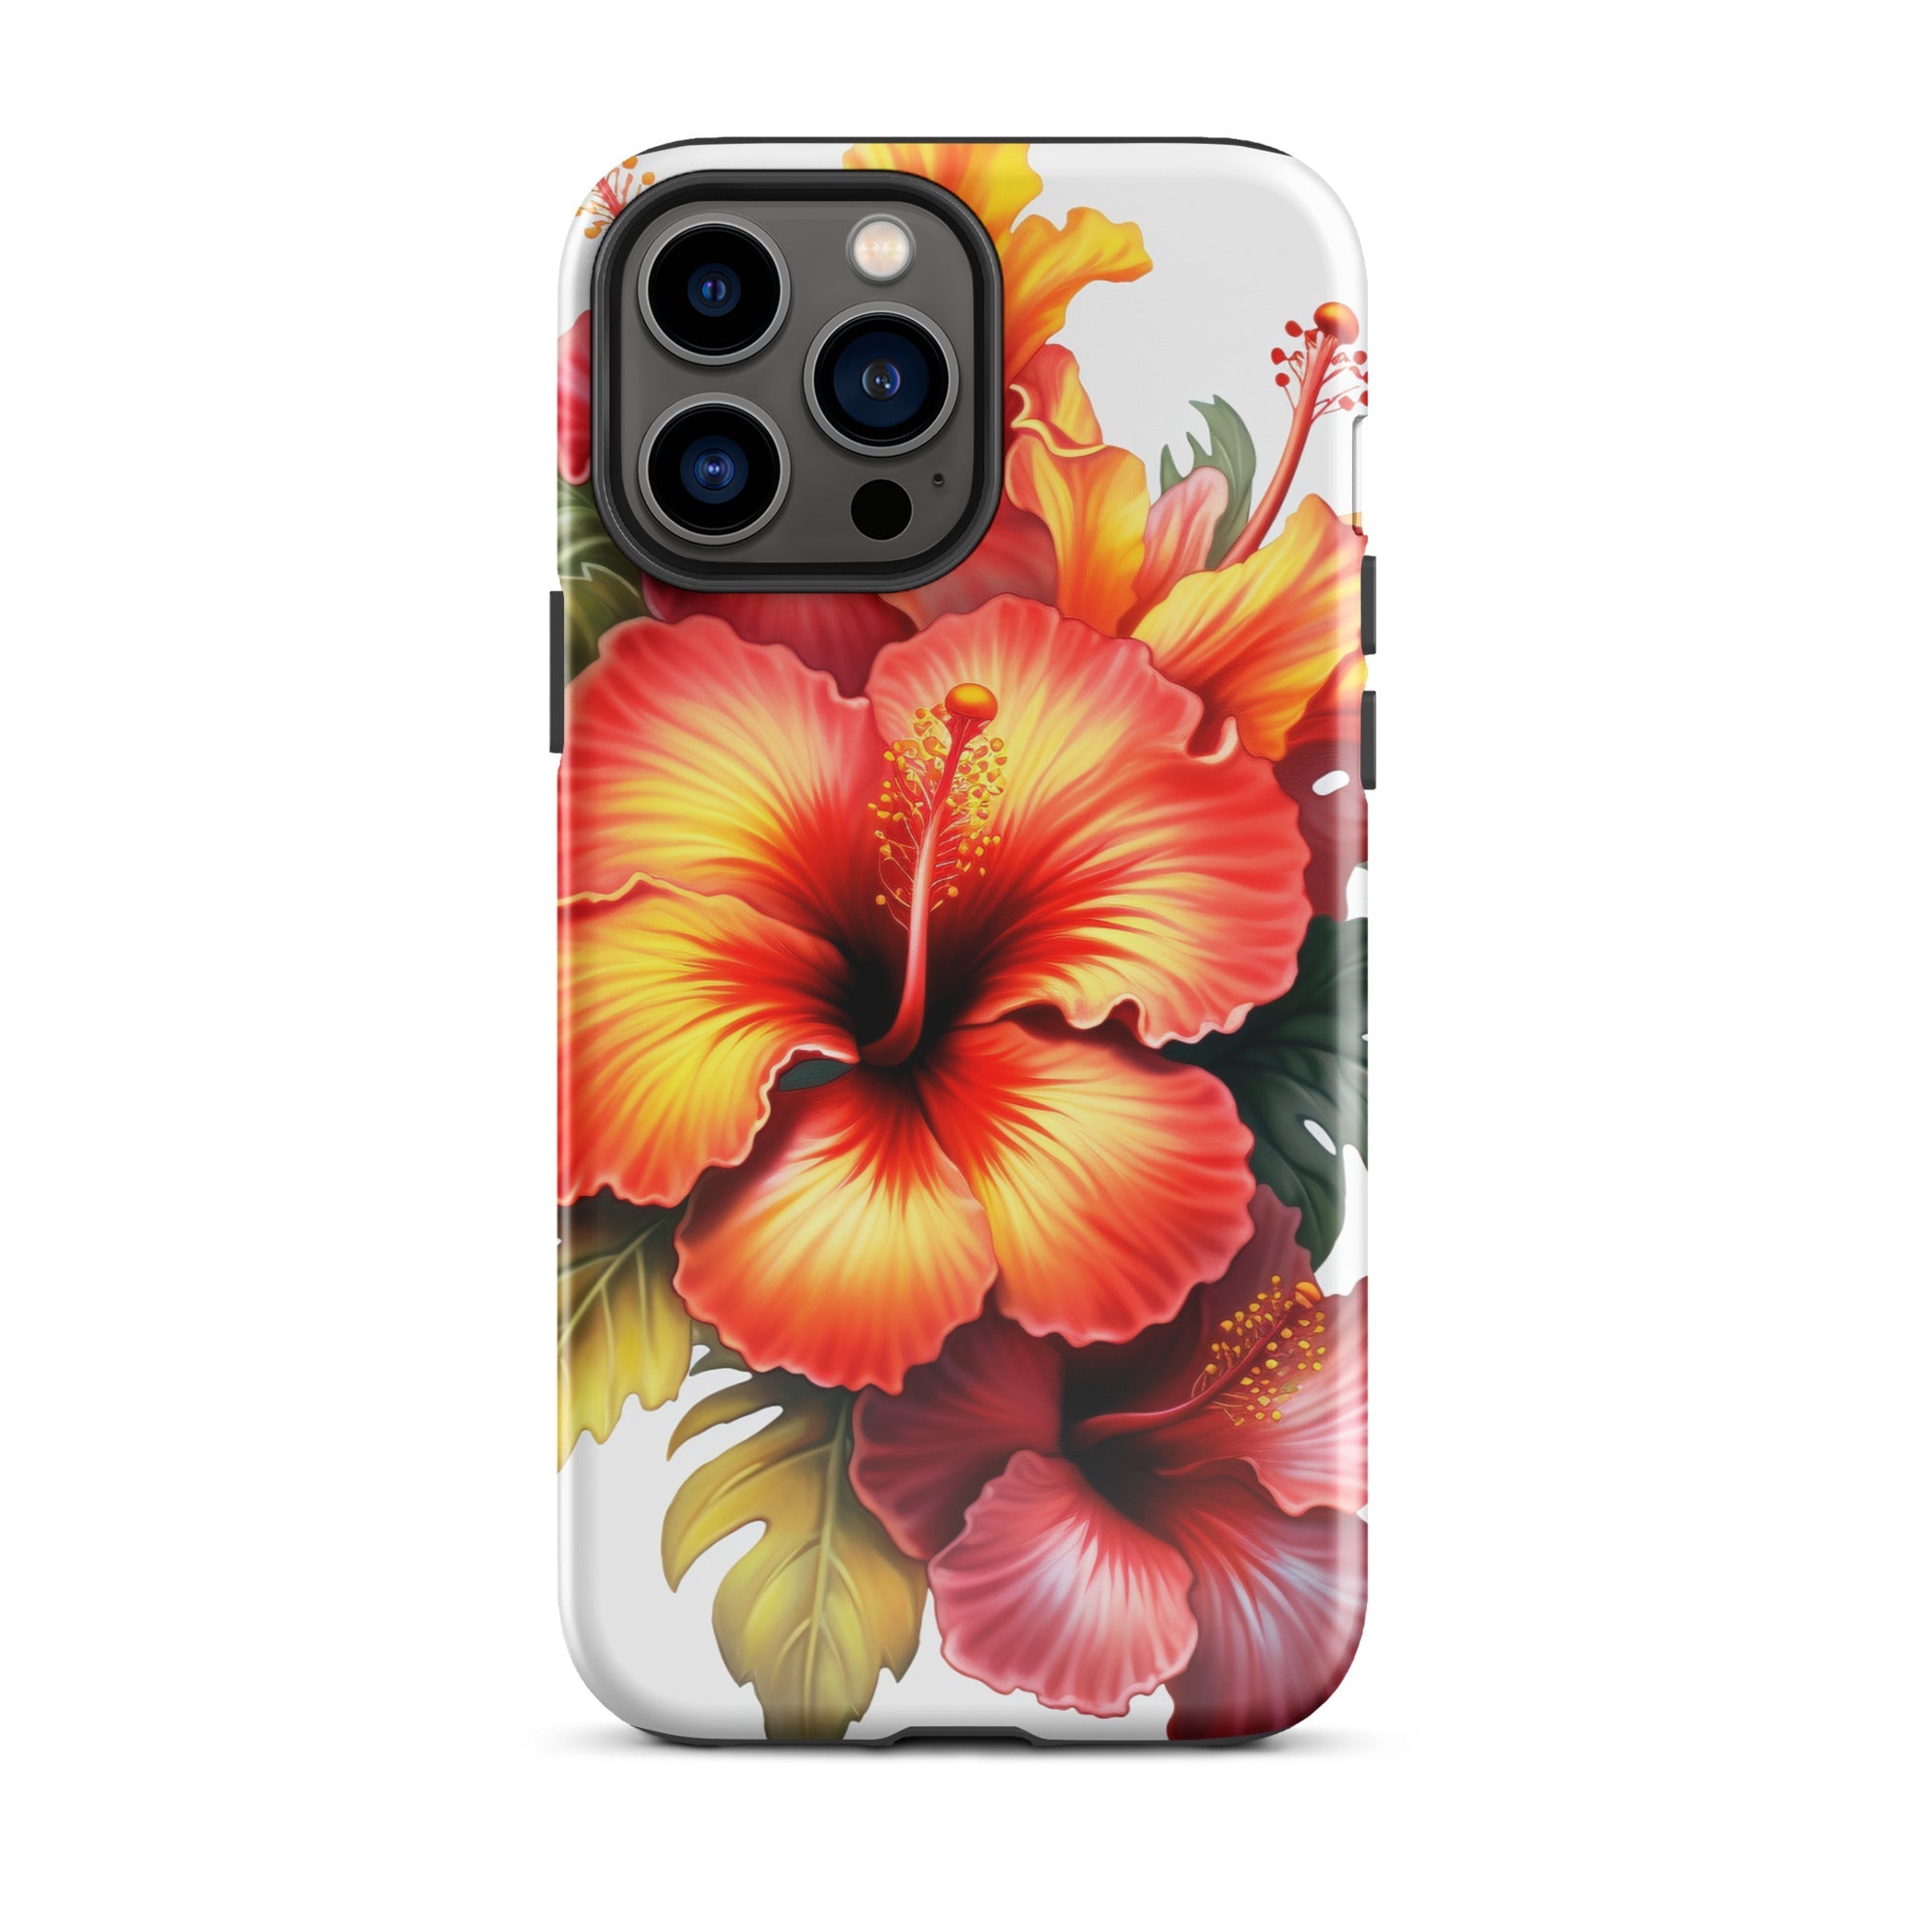 Hibiscus Flower iPhone Case by Visual Verse - Image 21